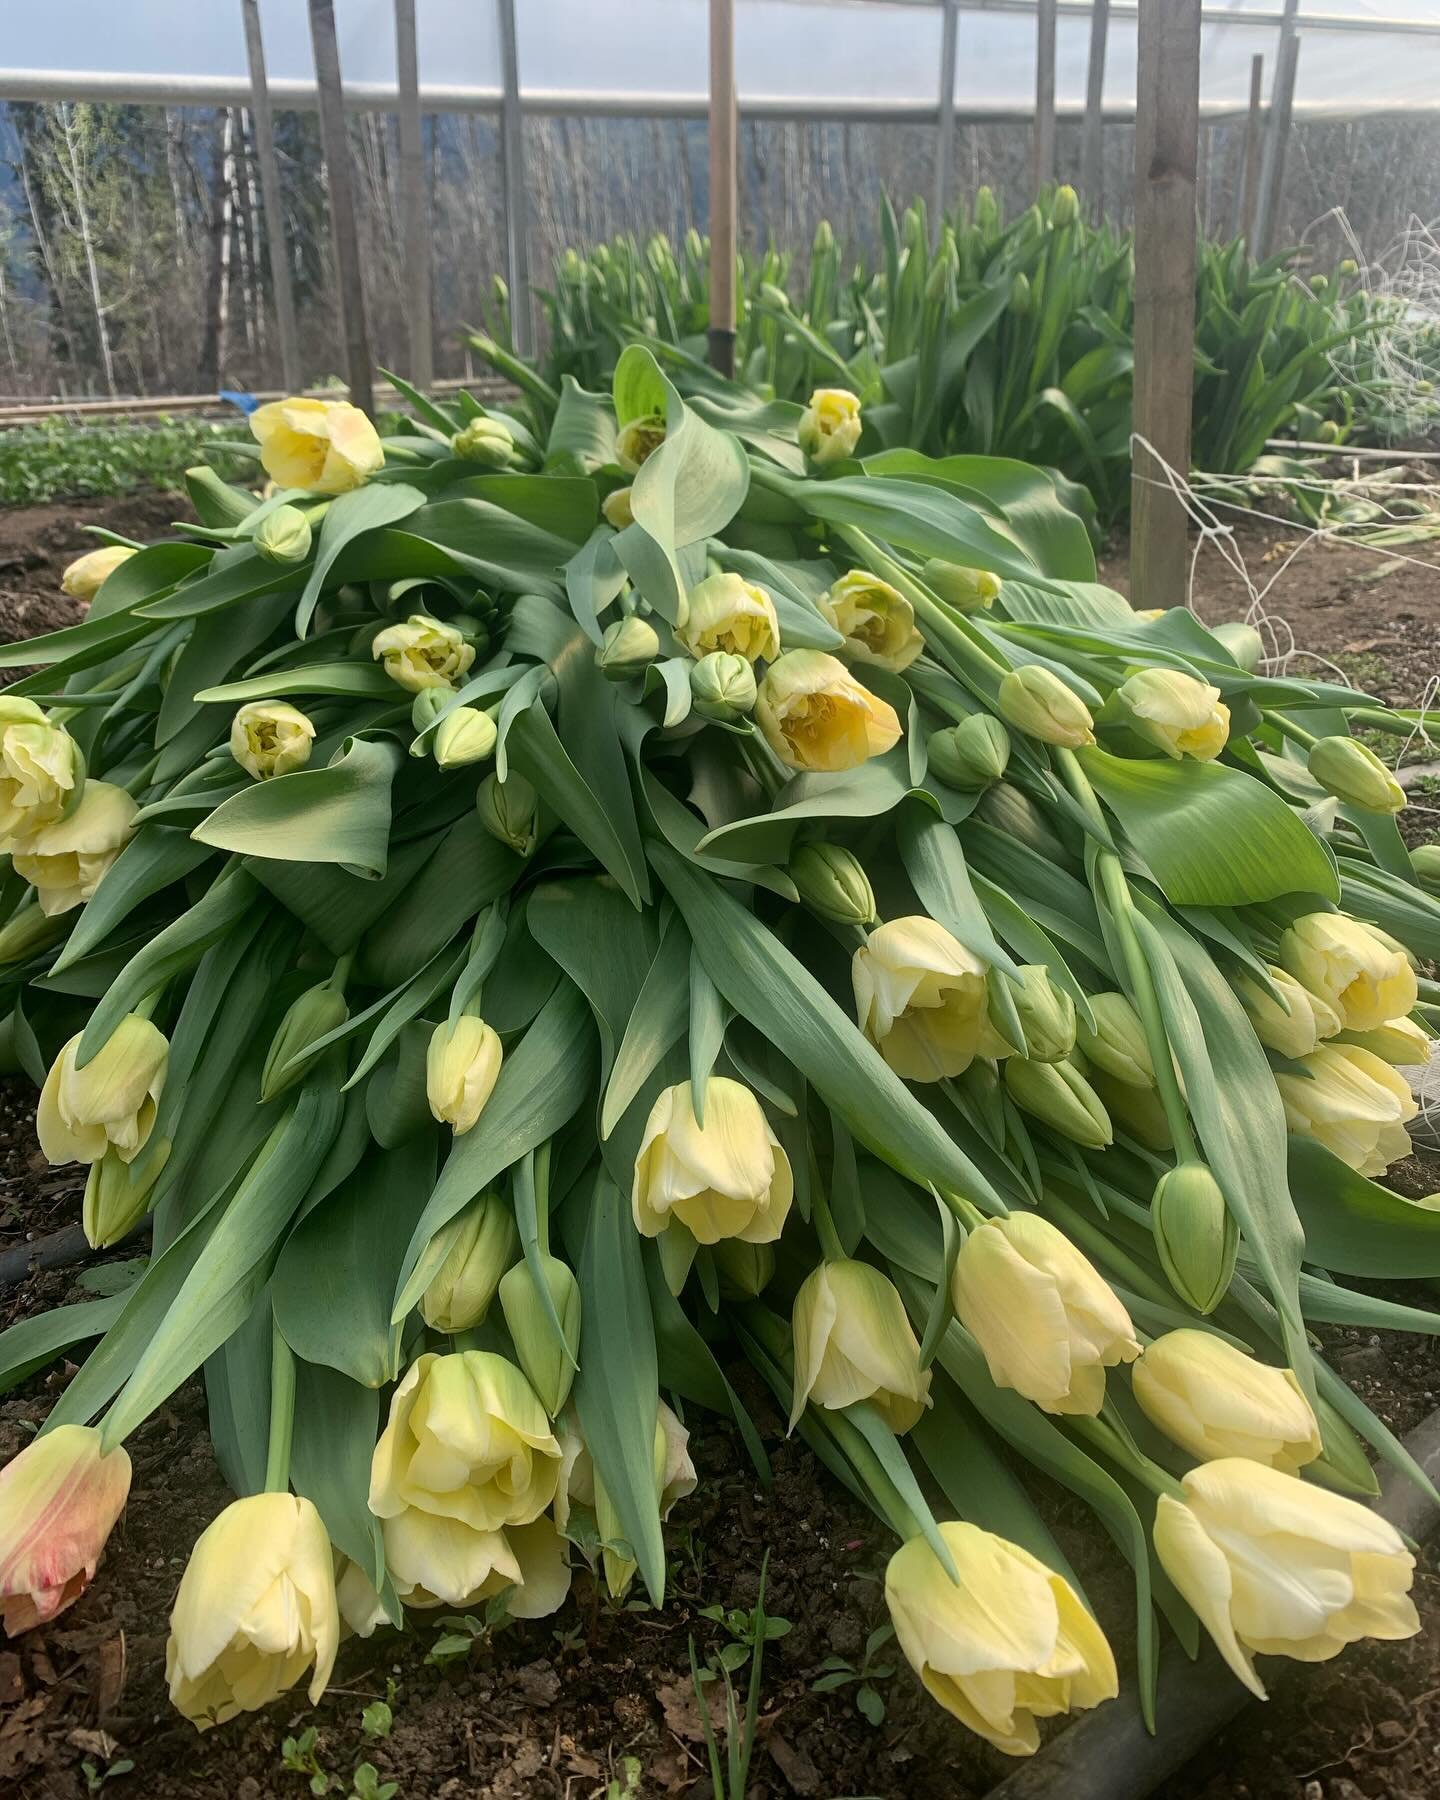 There&rsquo;s nothing quite like a mountain of tulips. 😍
Tulip: Silk Road
#flowerfarming
#goldenbcflorist
#goldenbcflowerfarm